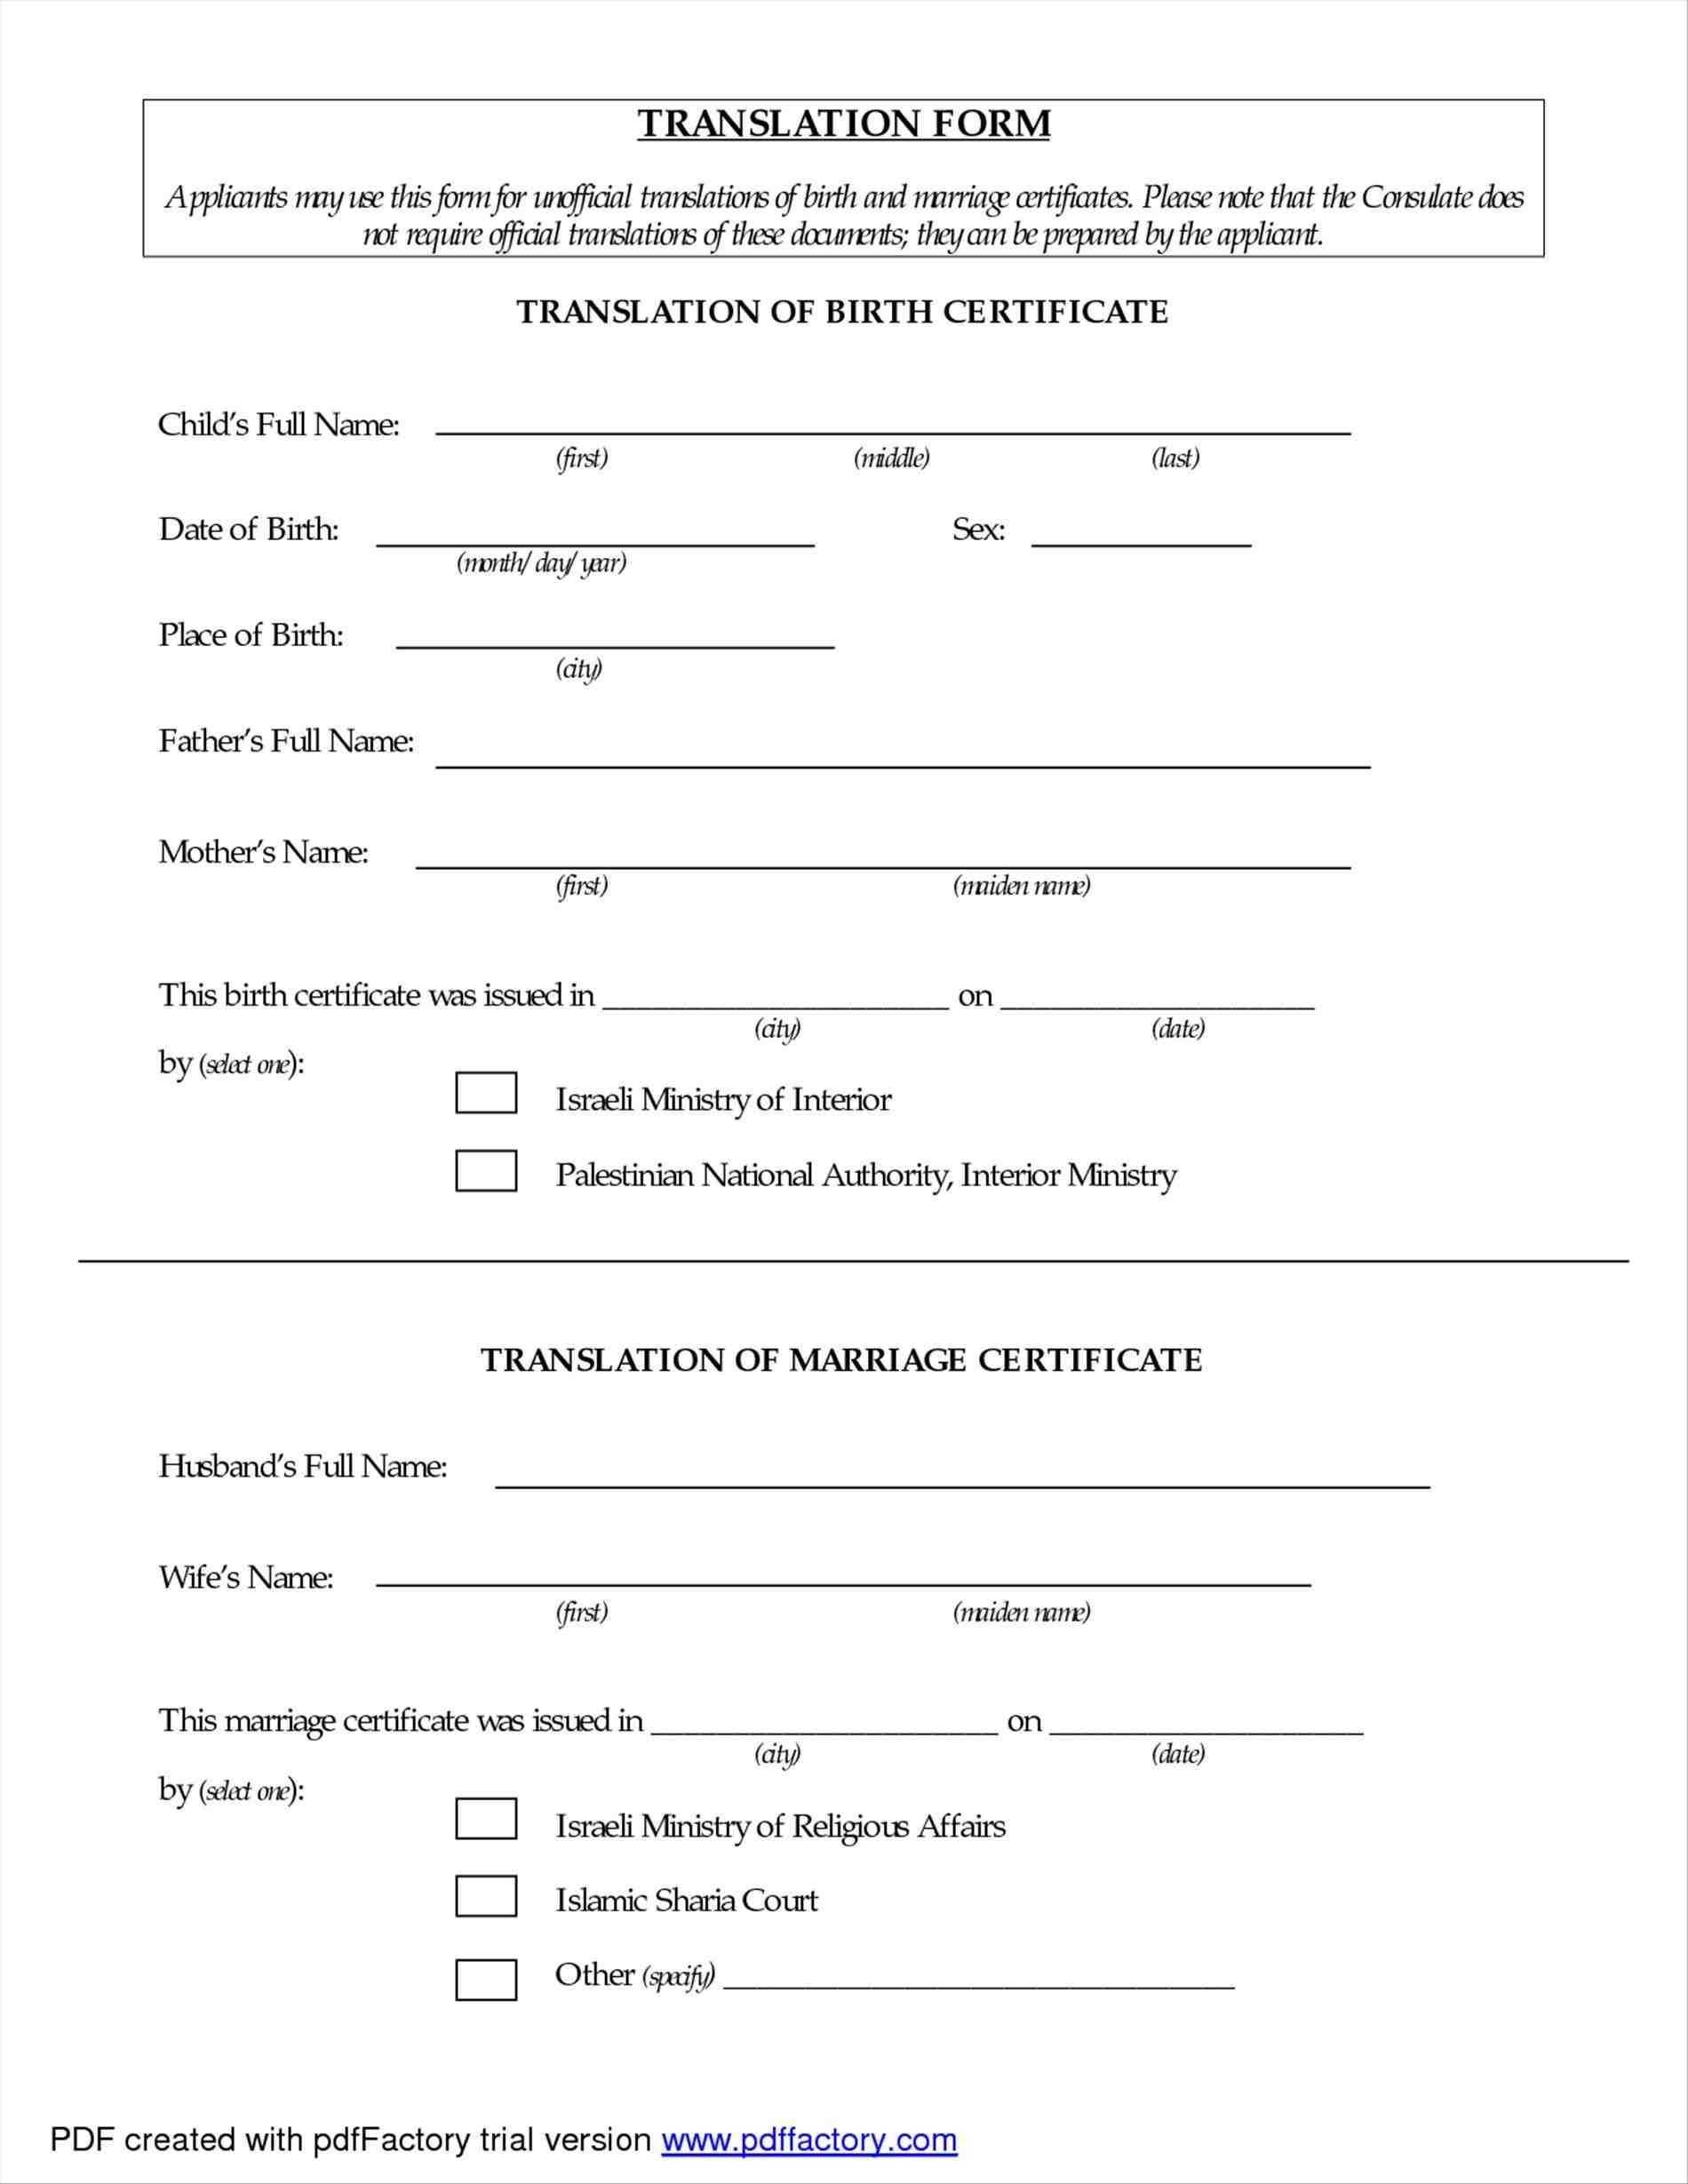 025 Unabridged Marriage Certificate Sample Of Template With Regard To Spanish To English Birth Certificate Translation Template